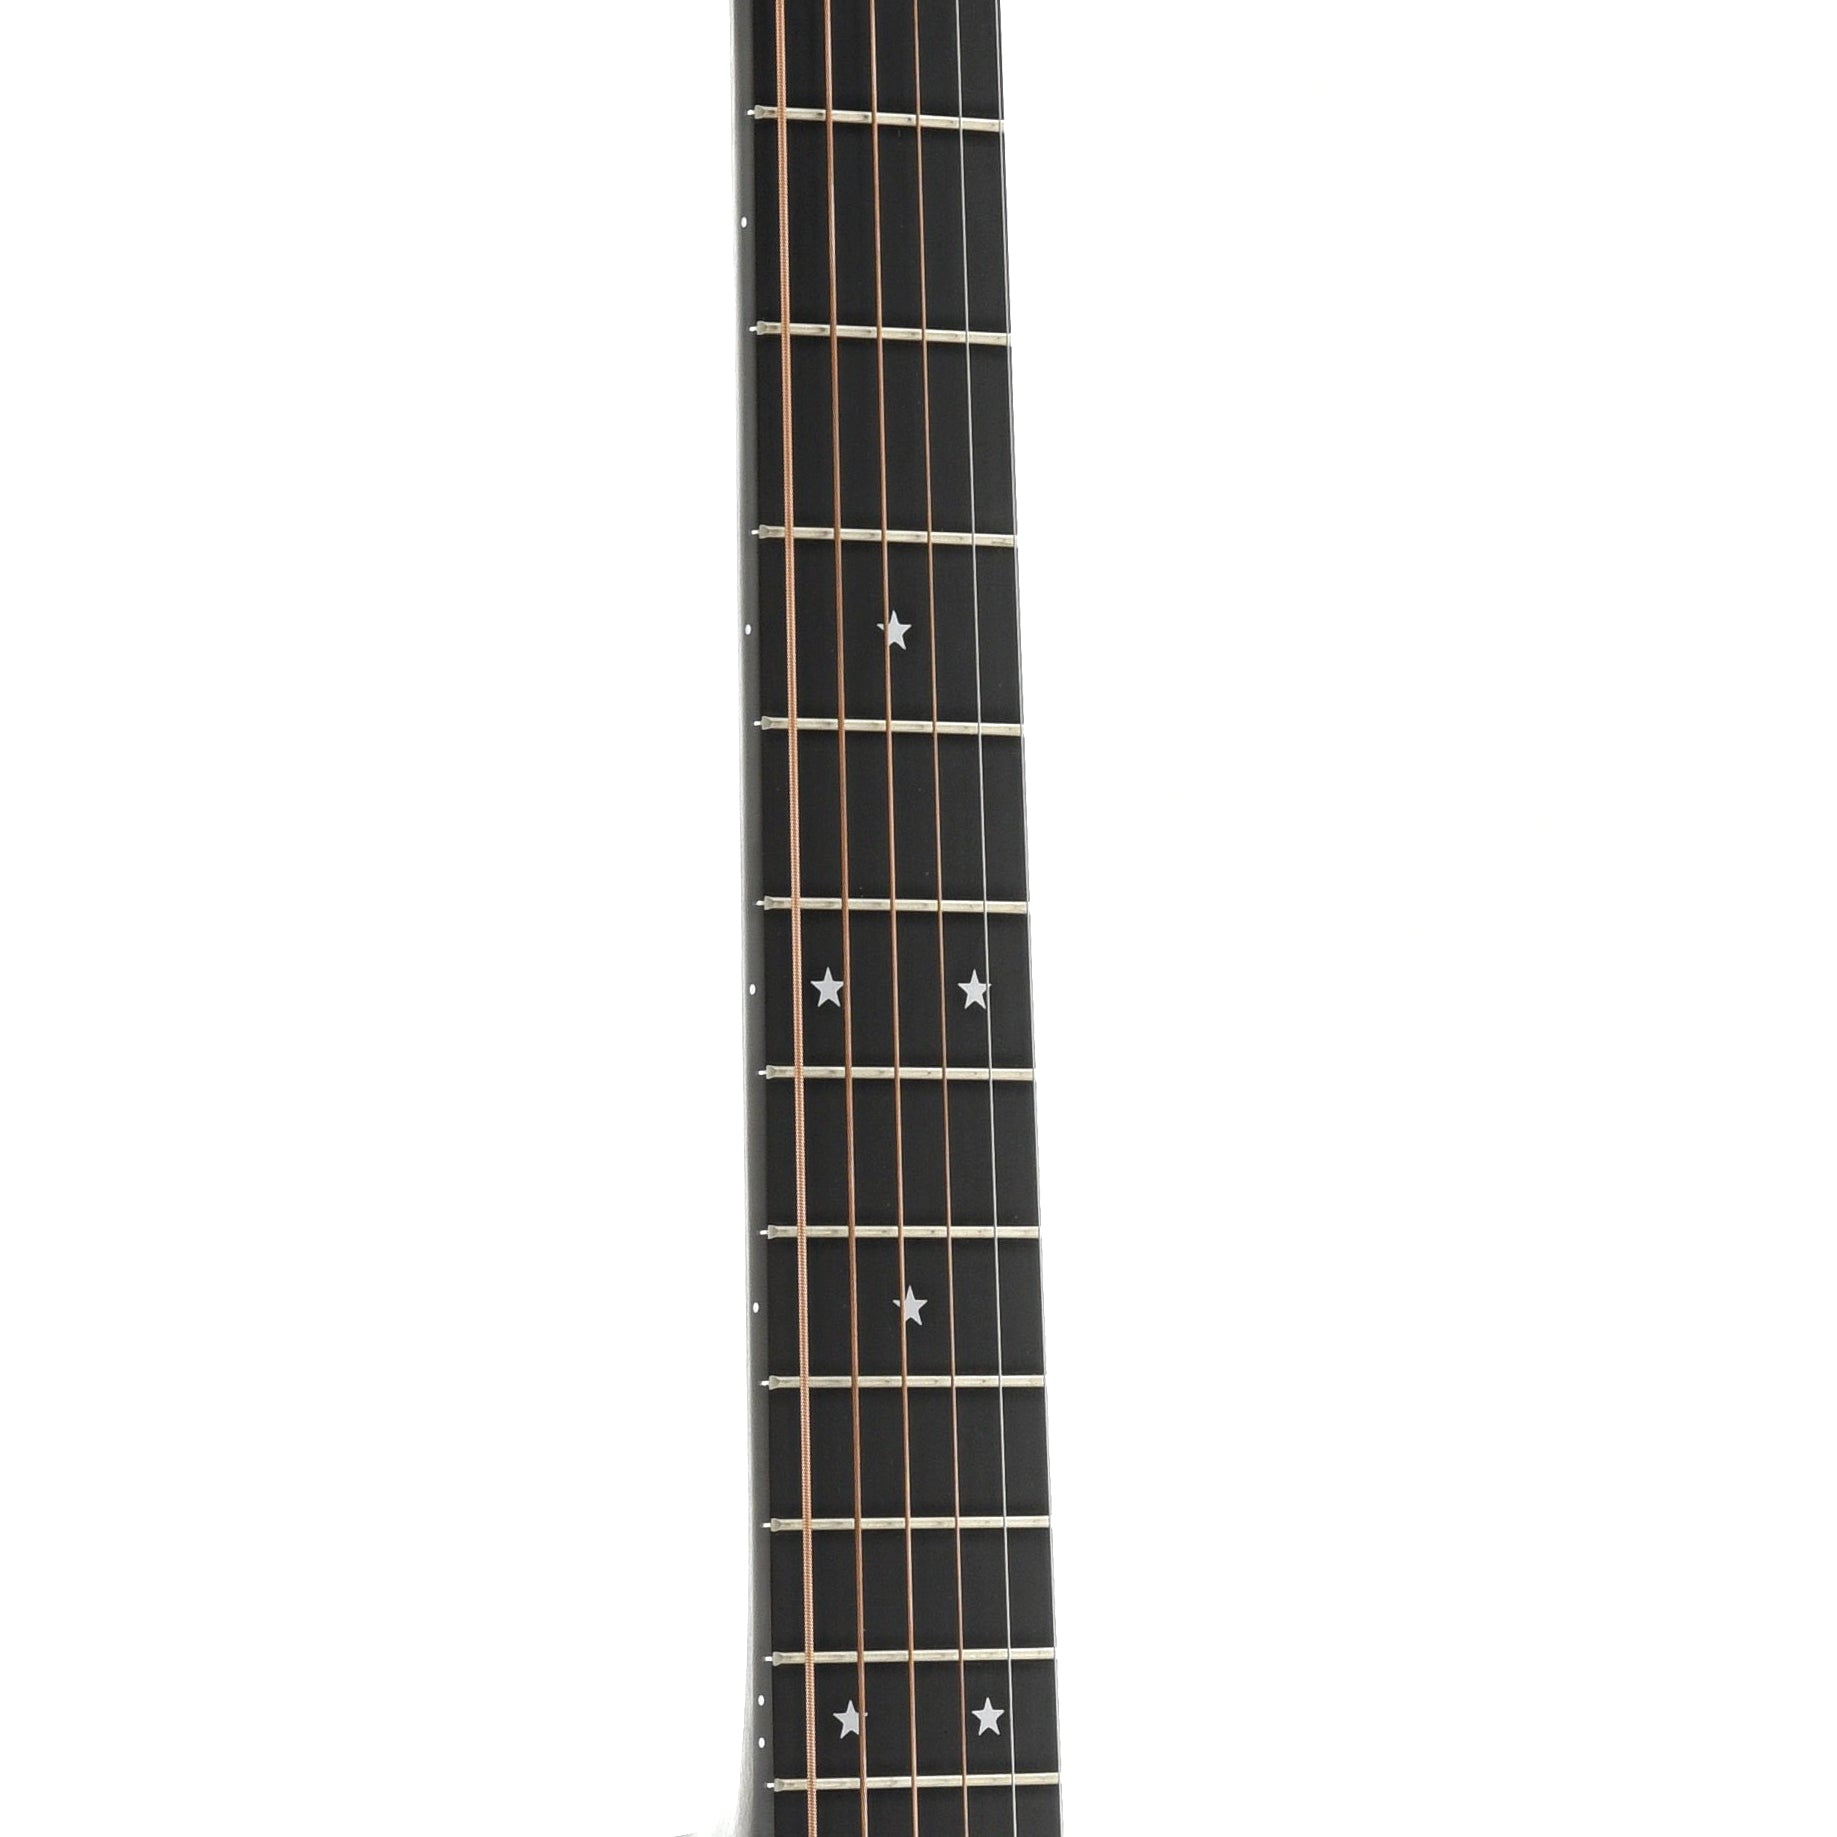 Fretboard of Martin DX Johnny Cash Guitar with Pickup 